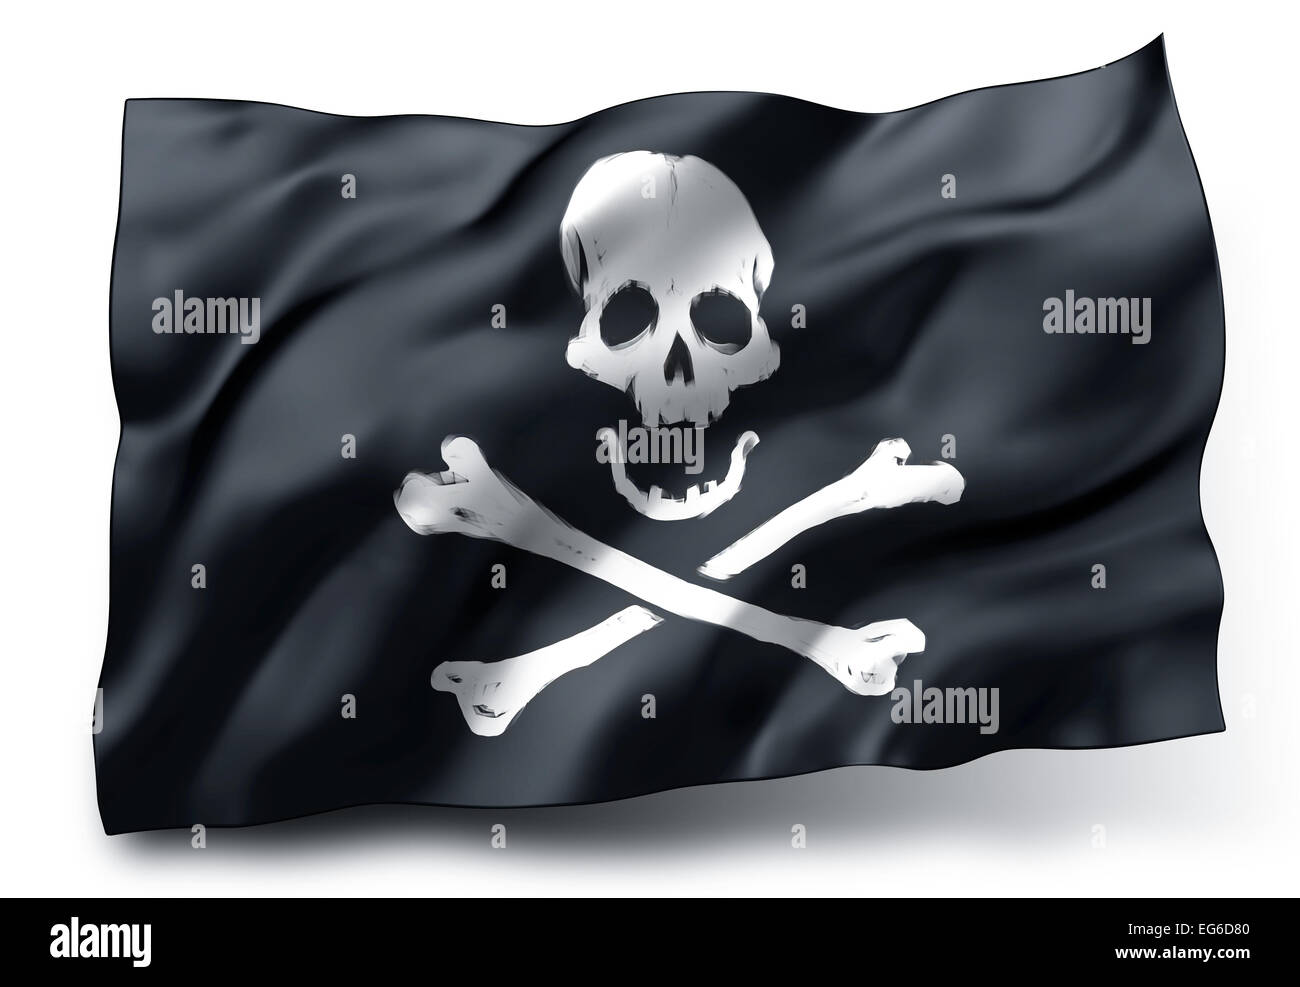 Black pirate flag Jolly Roger with skull and crossbones symbol isolated on white background Stock Photo